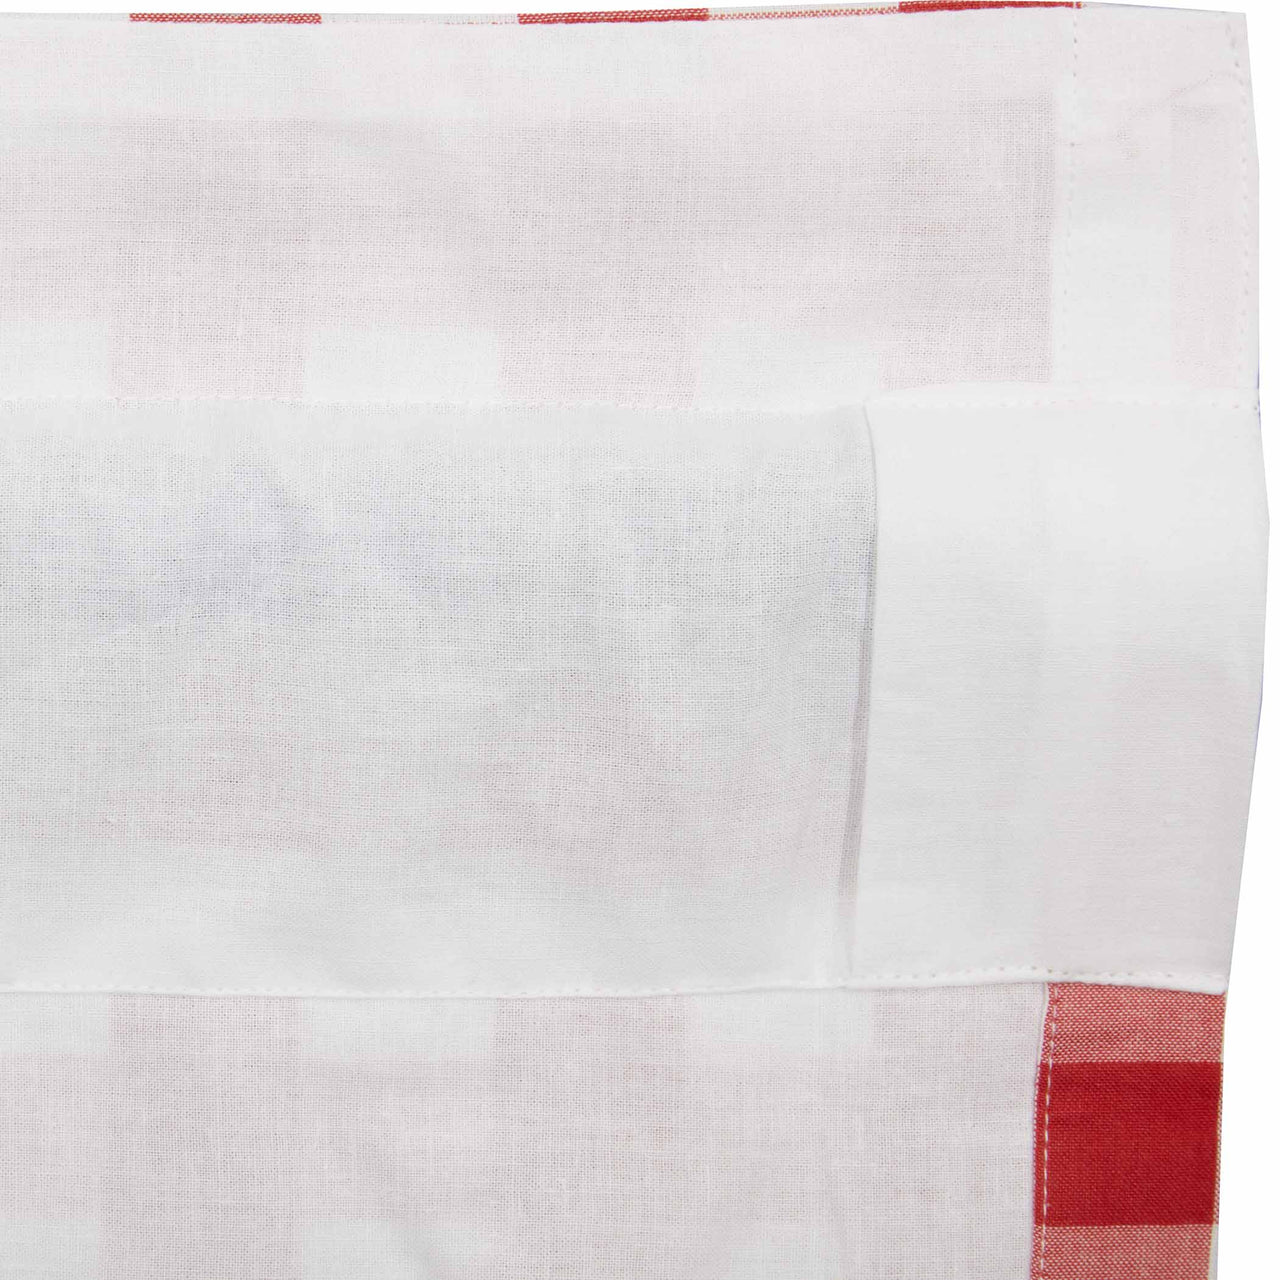 Annie Buffalo Red Check Ruffled Tier Curtain Set of 2 L36xW36